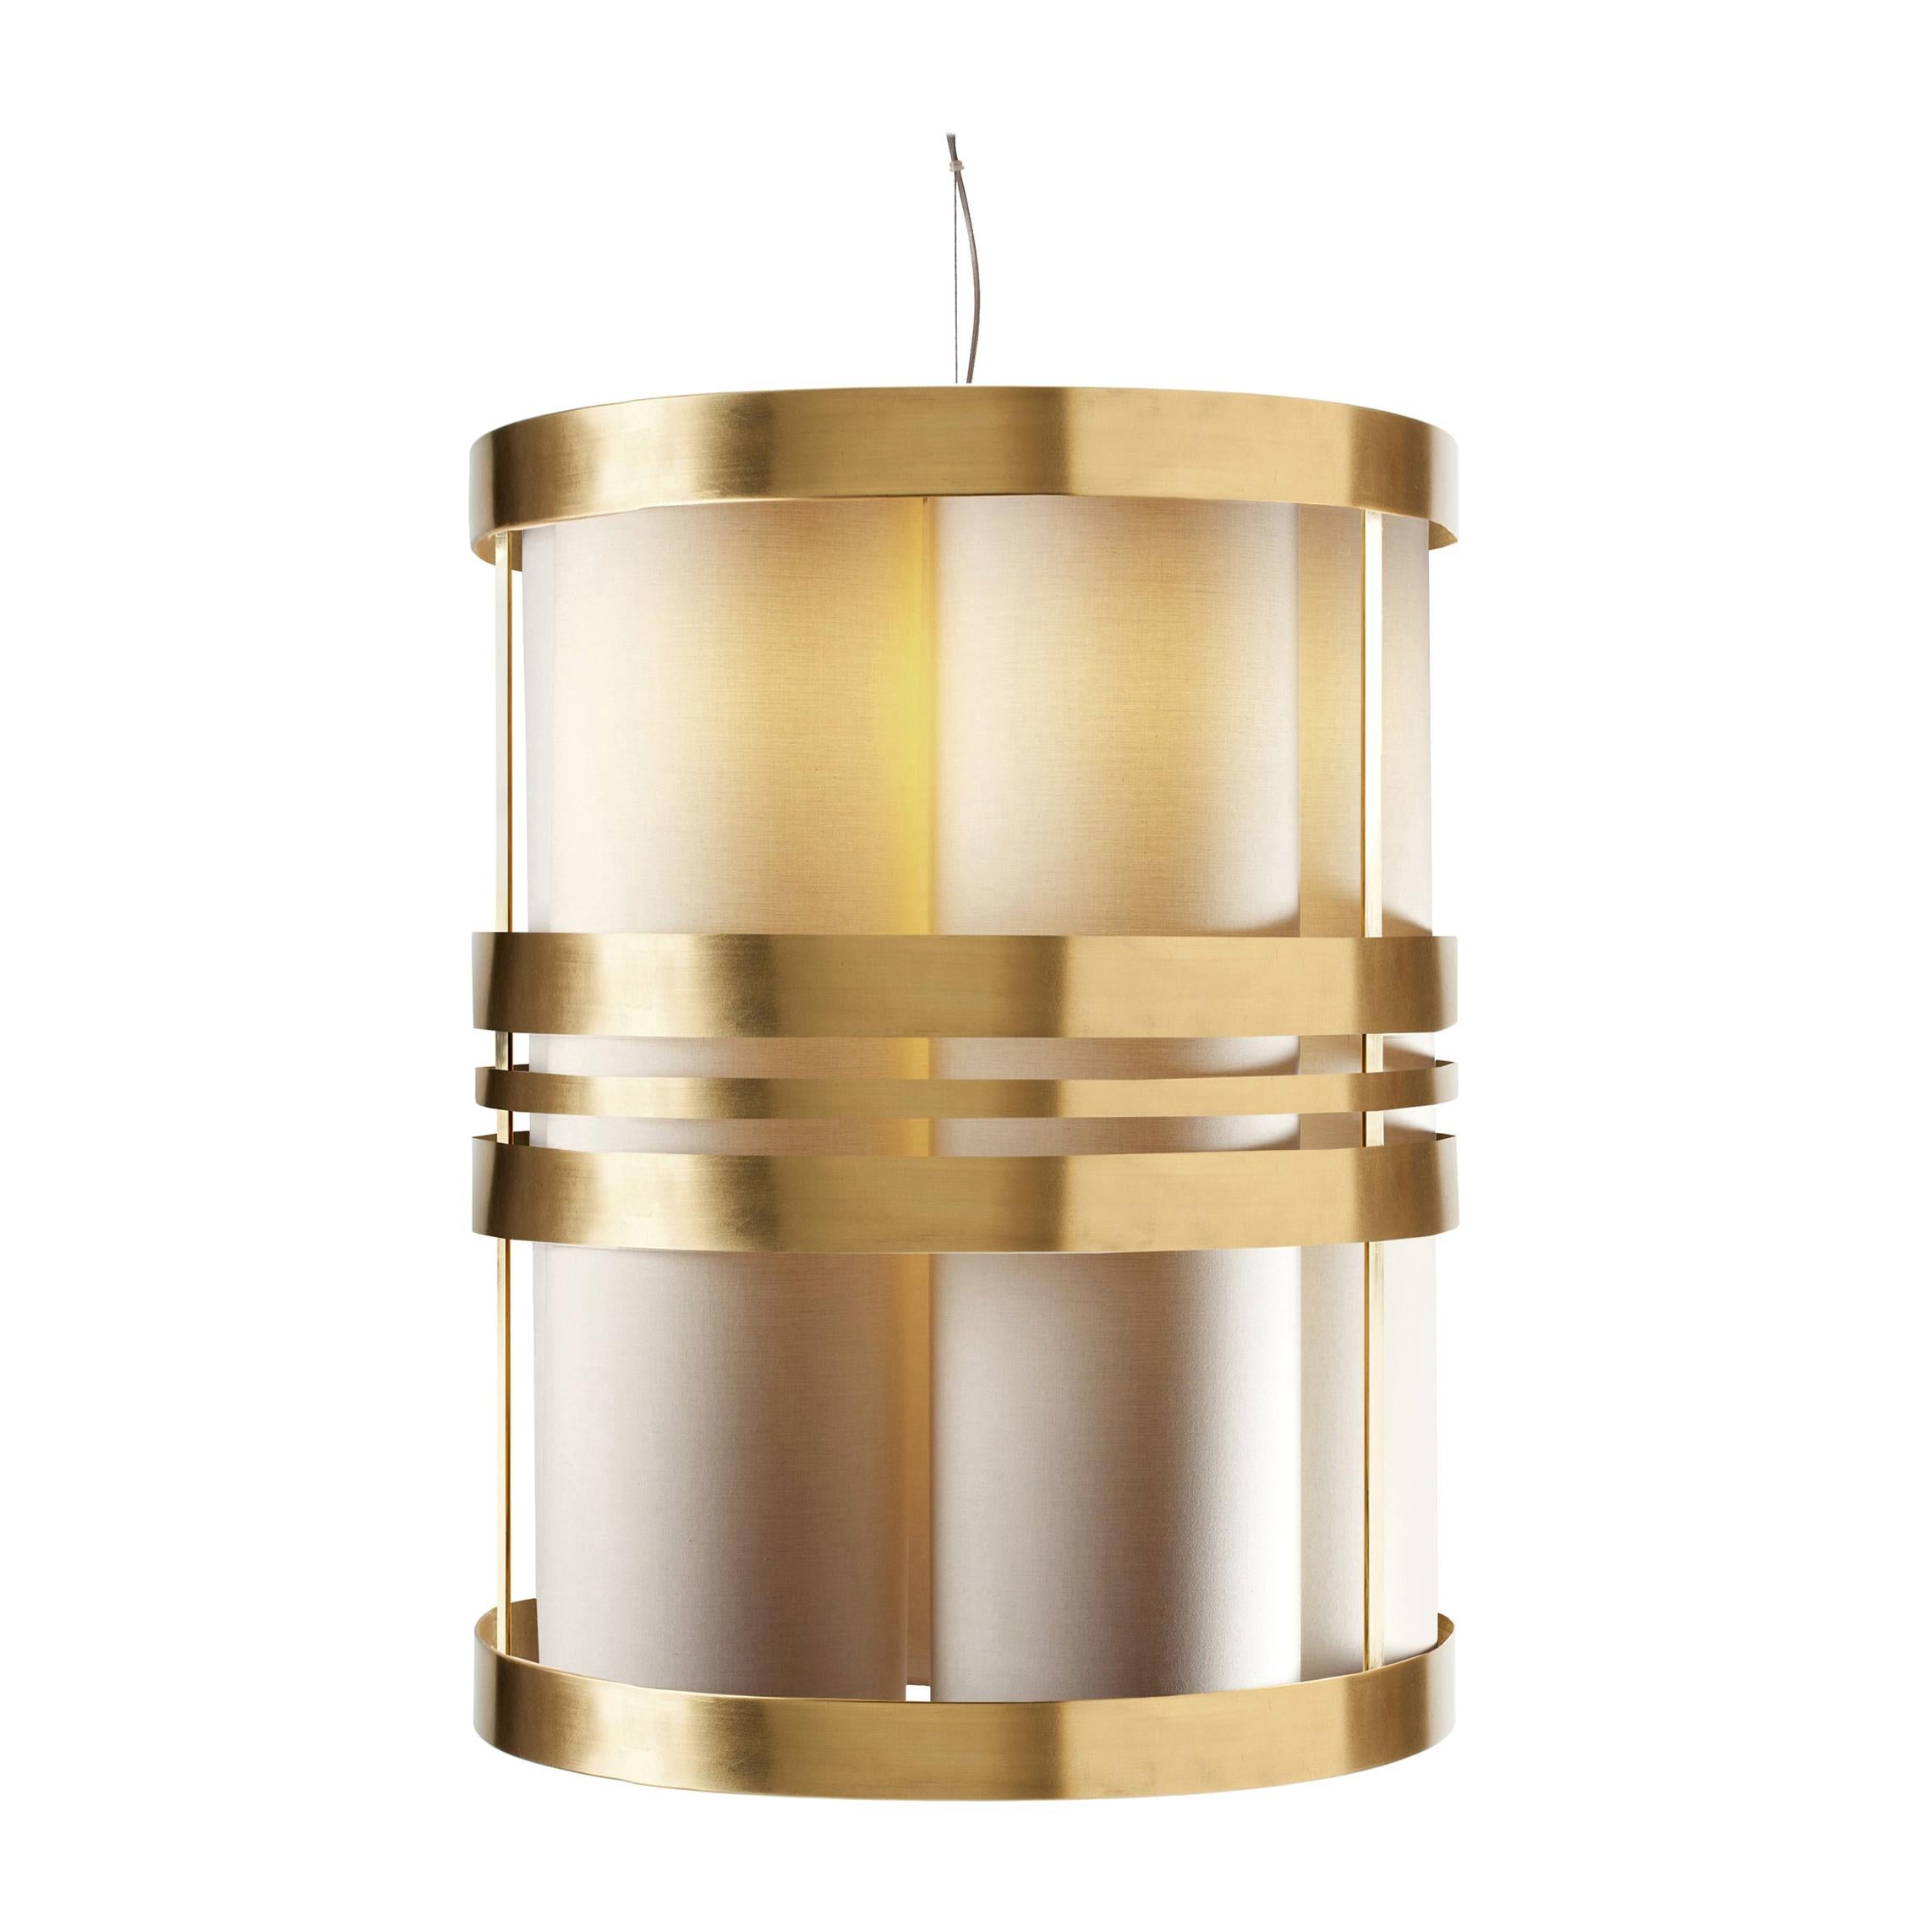 Contemporary Art Deco Inspired Circus Pendant Lamp Polished Brass